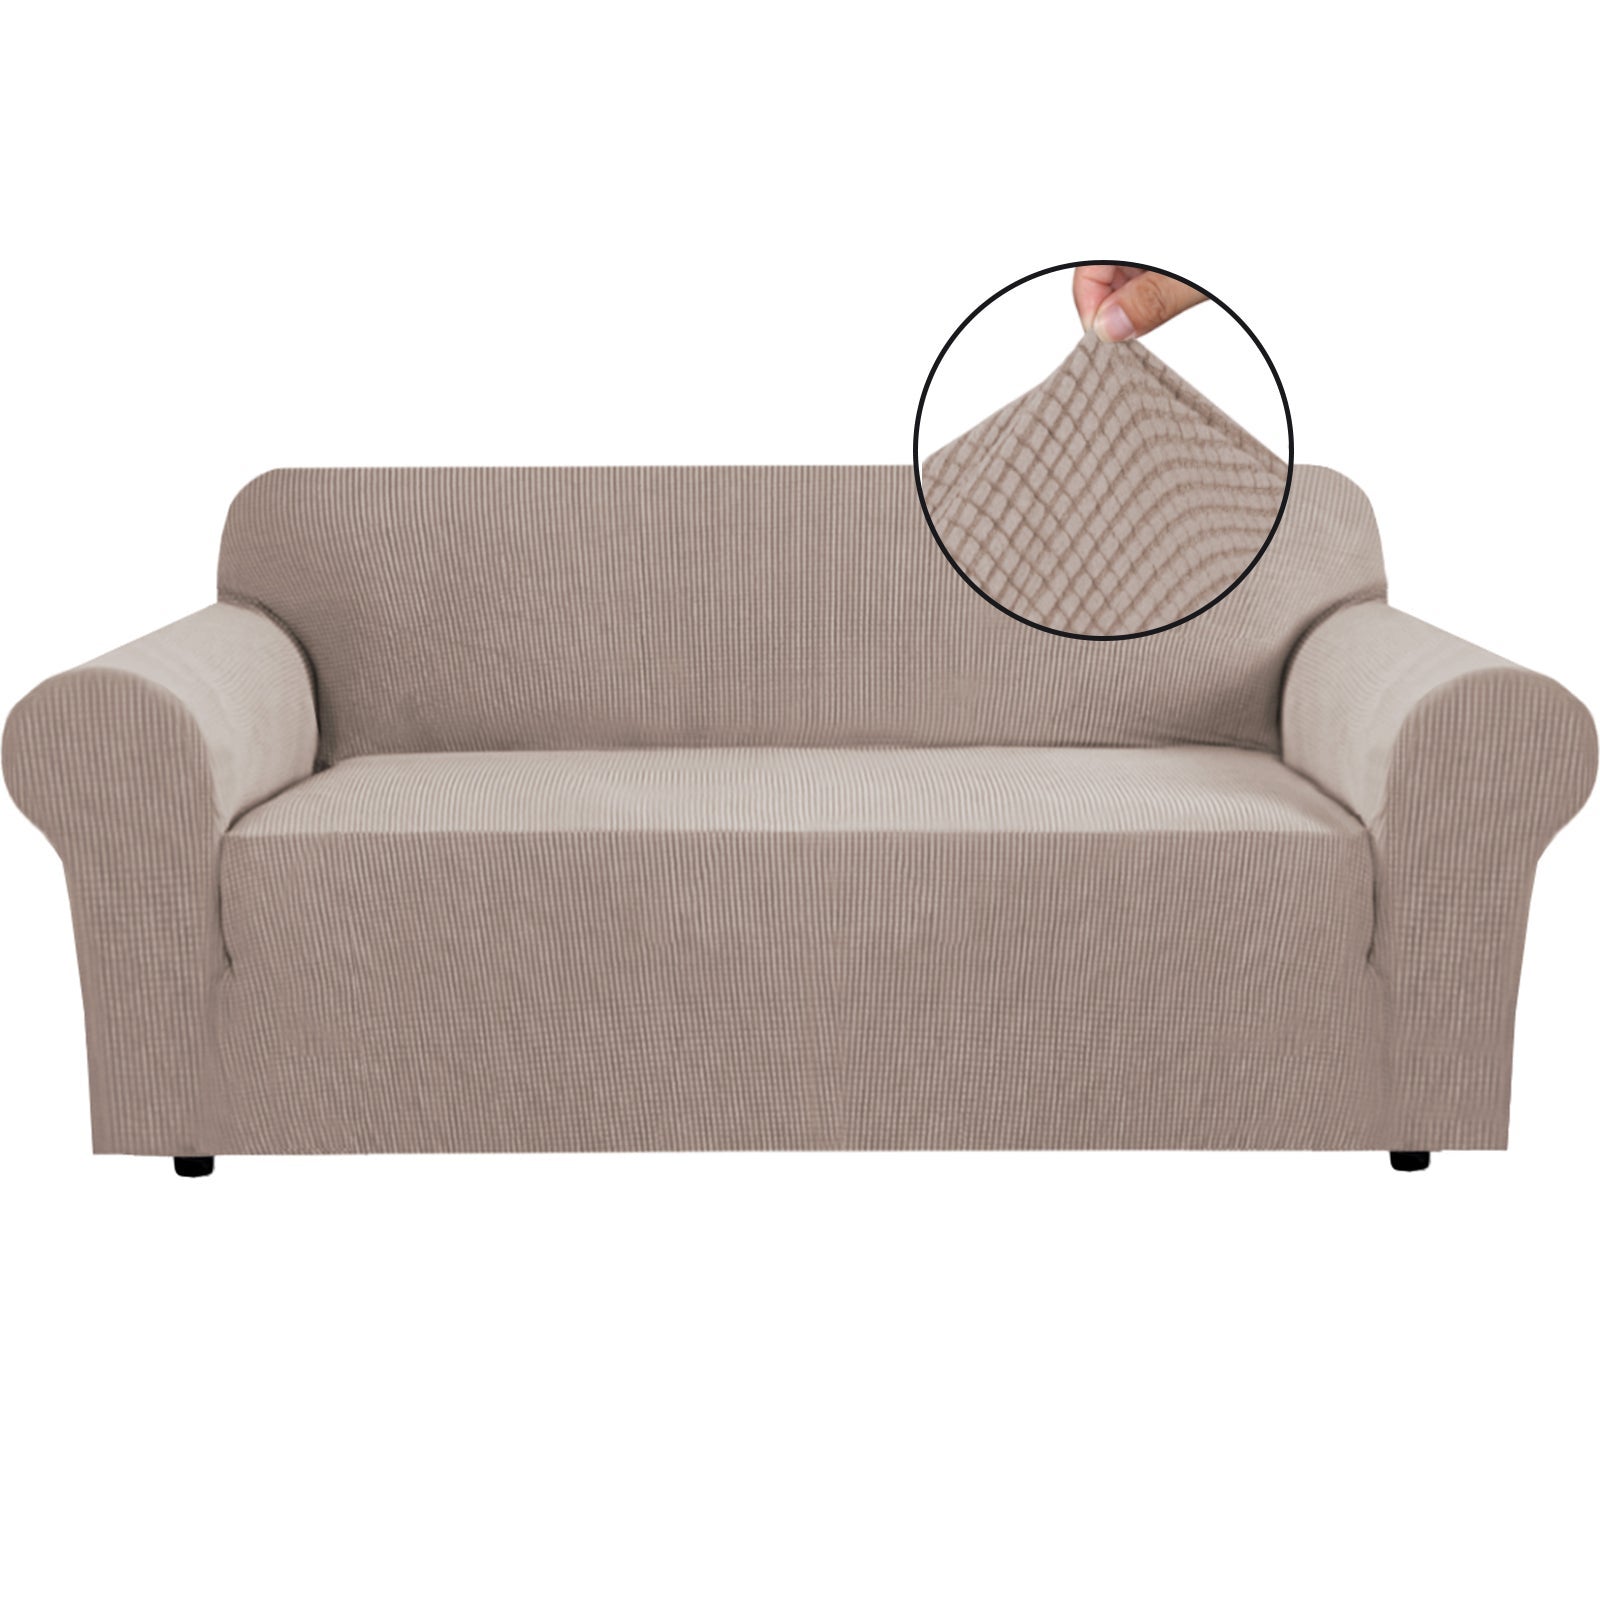 Chair & Sofa Covers For Sale Online | MyDeal